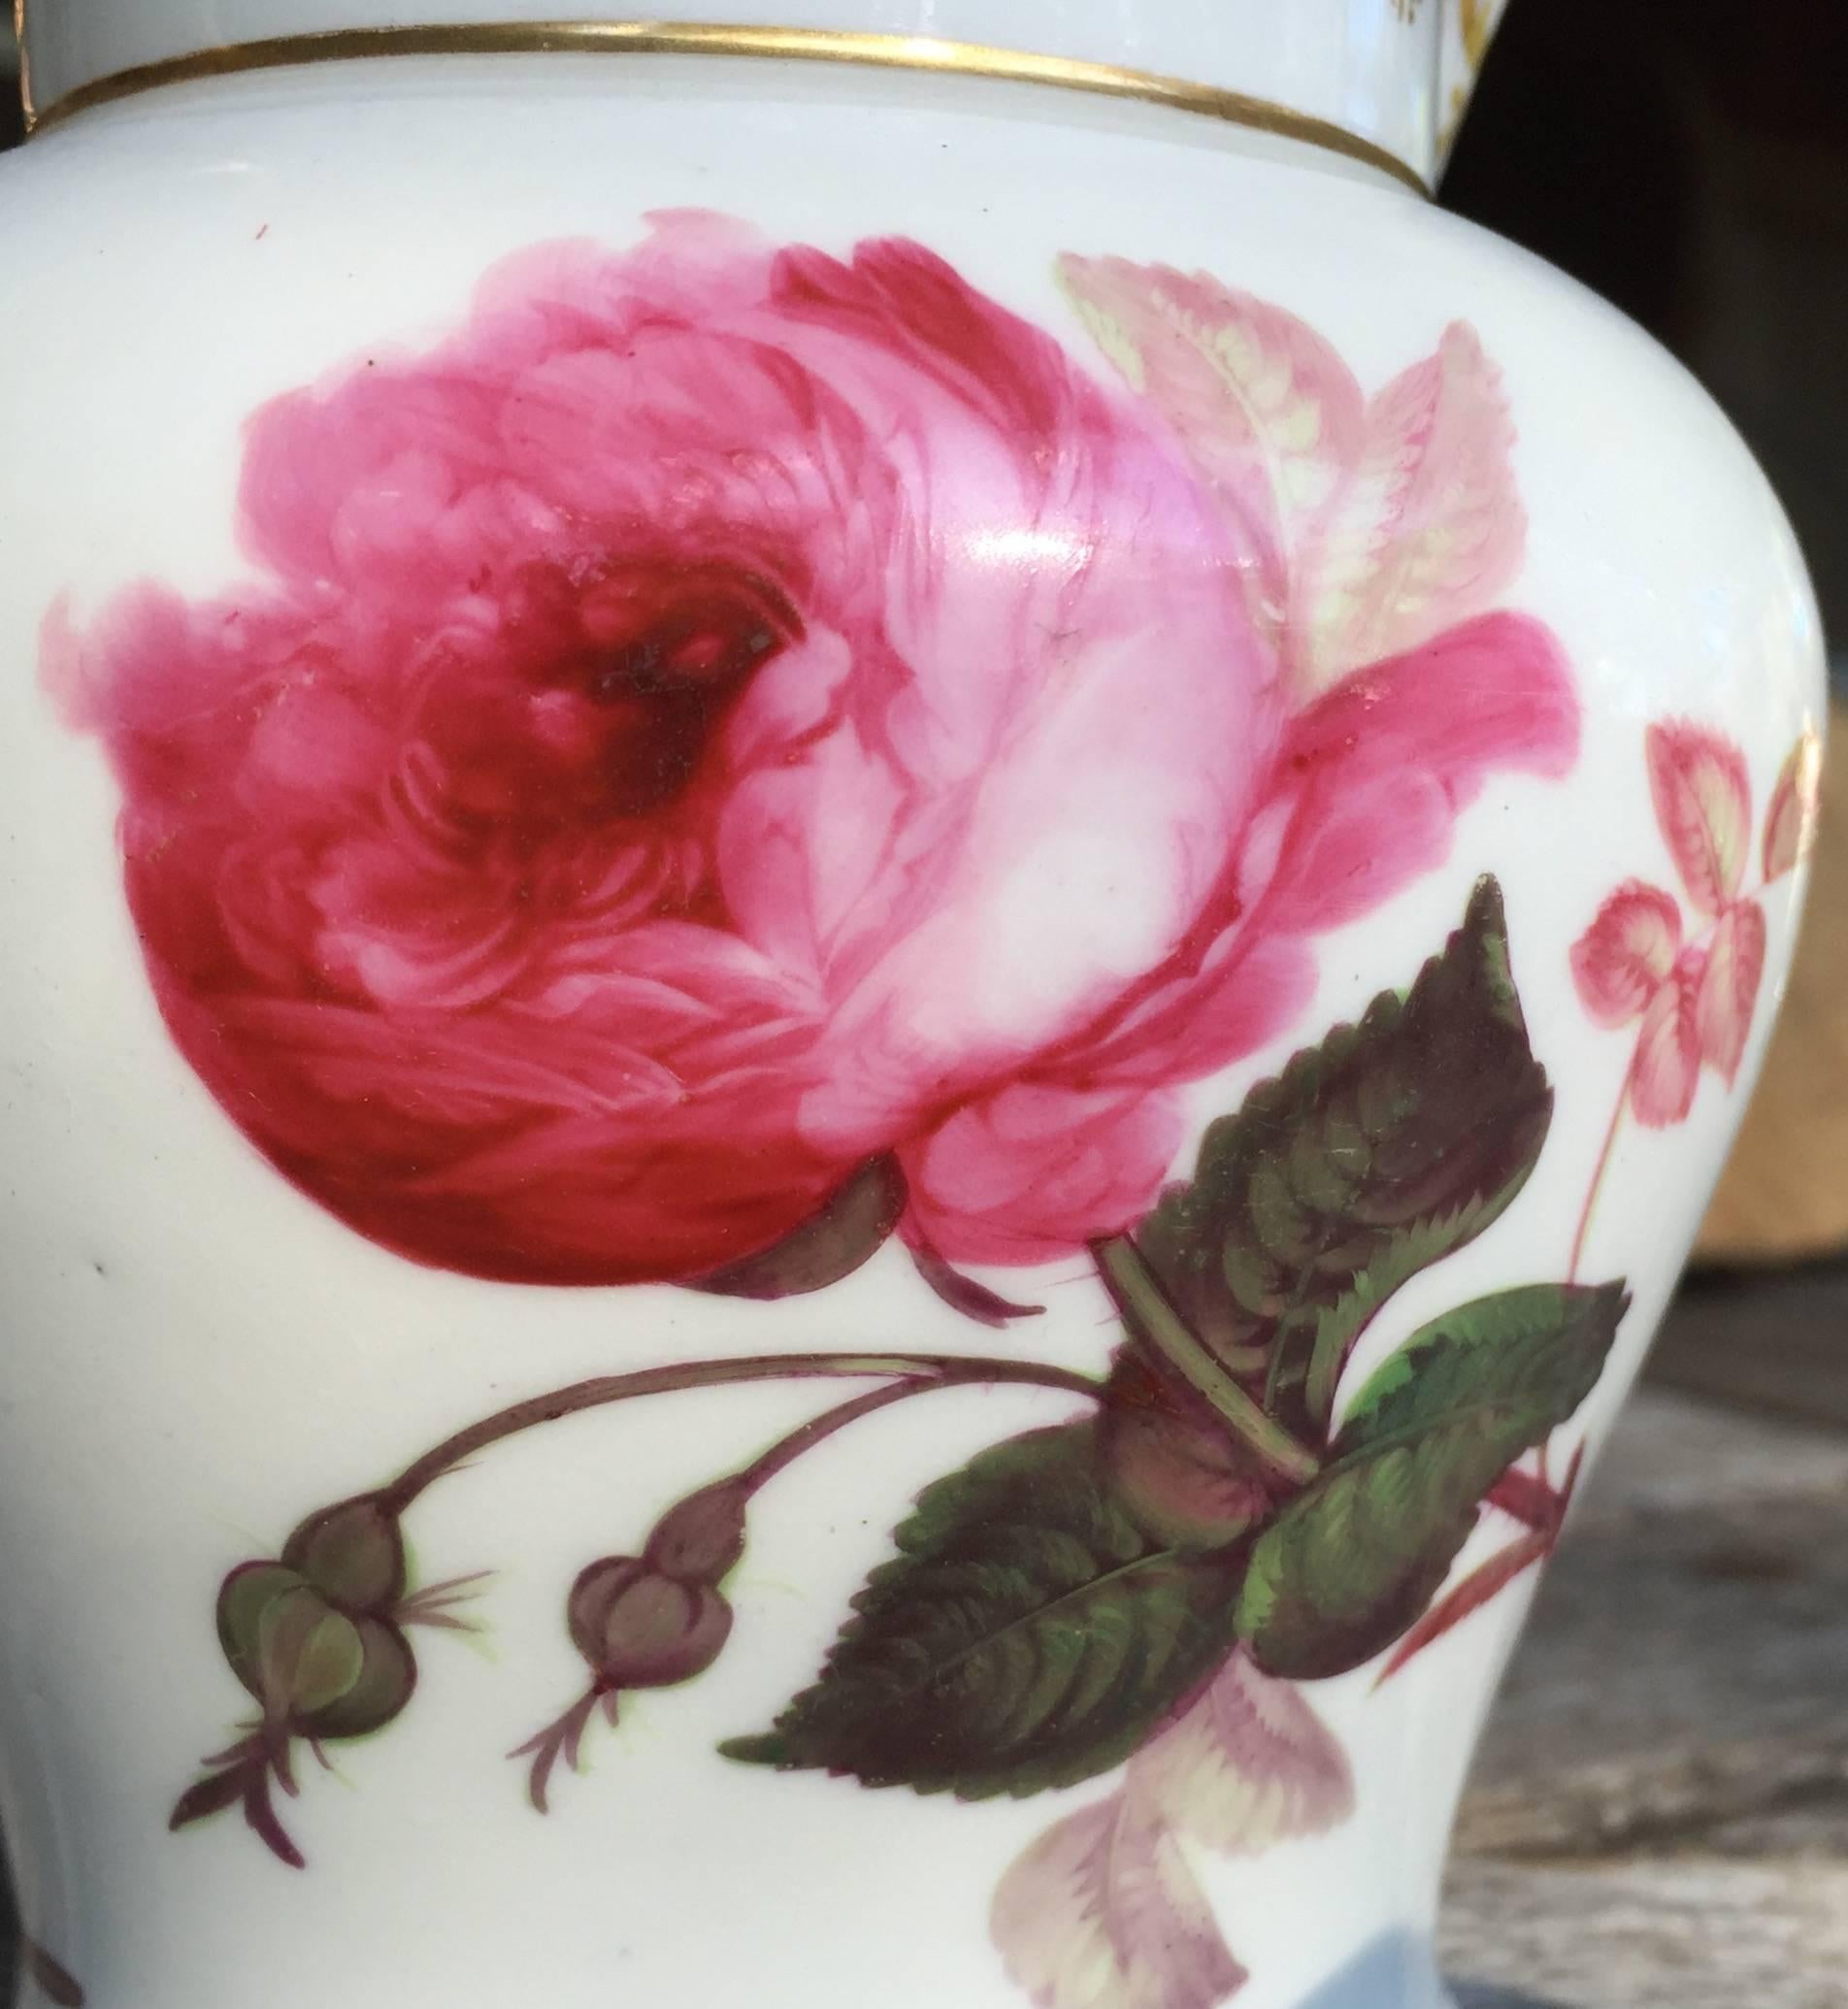 This Beautyful Paris Porcelain Hand painted Pitcher with elaborate Roses and Tulips amongst others could not be better in execution. 
The hand-painted Goldwork continues on the inside of the snout of the Pitcher.
Made ca 1820 in France, Paris.